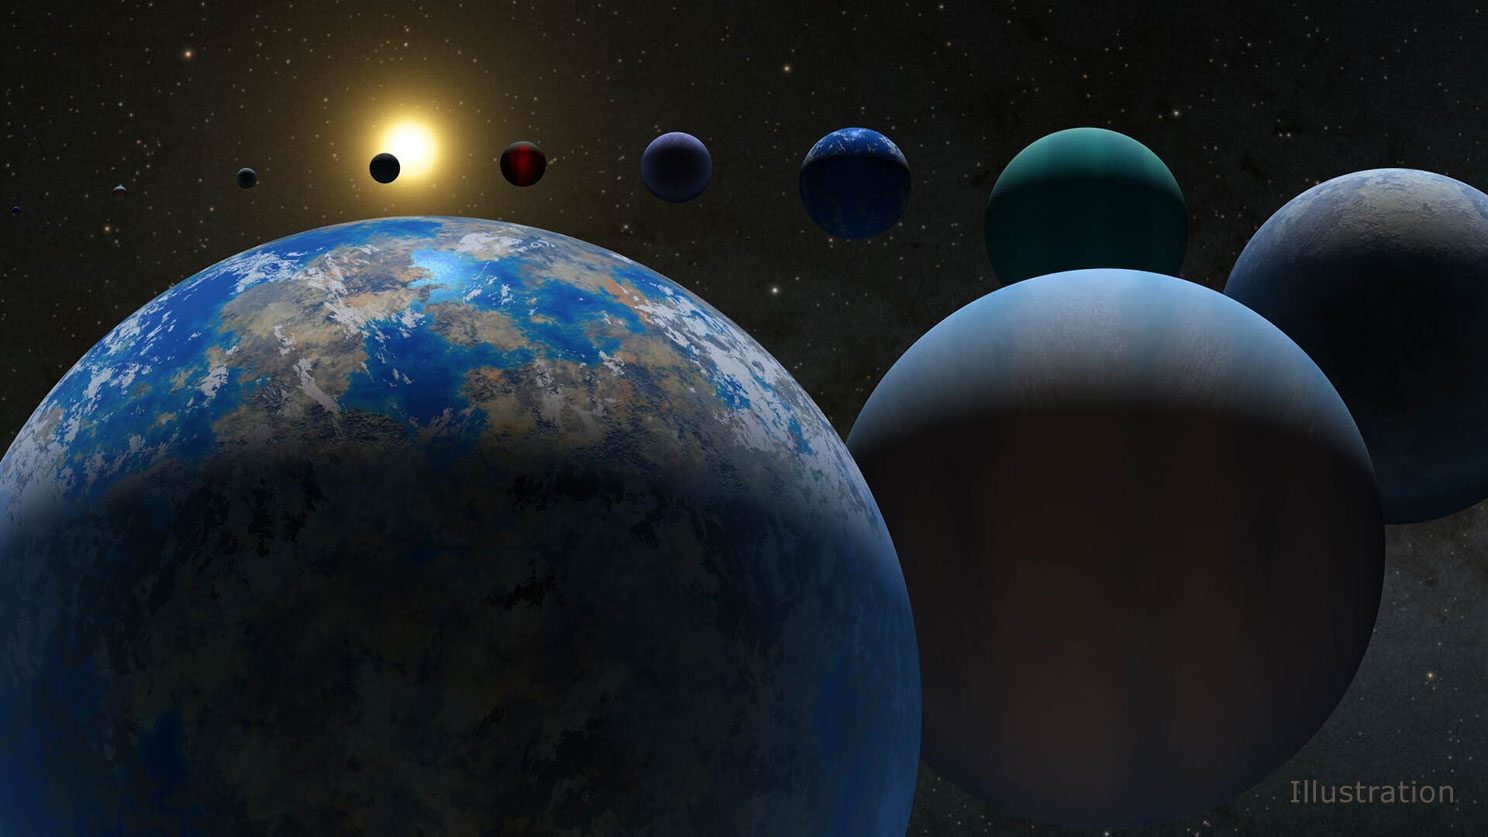 5,000 exoplanets! NASA confirms big milestone for planetary science | Space